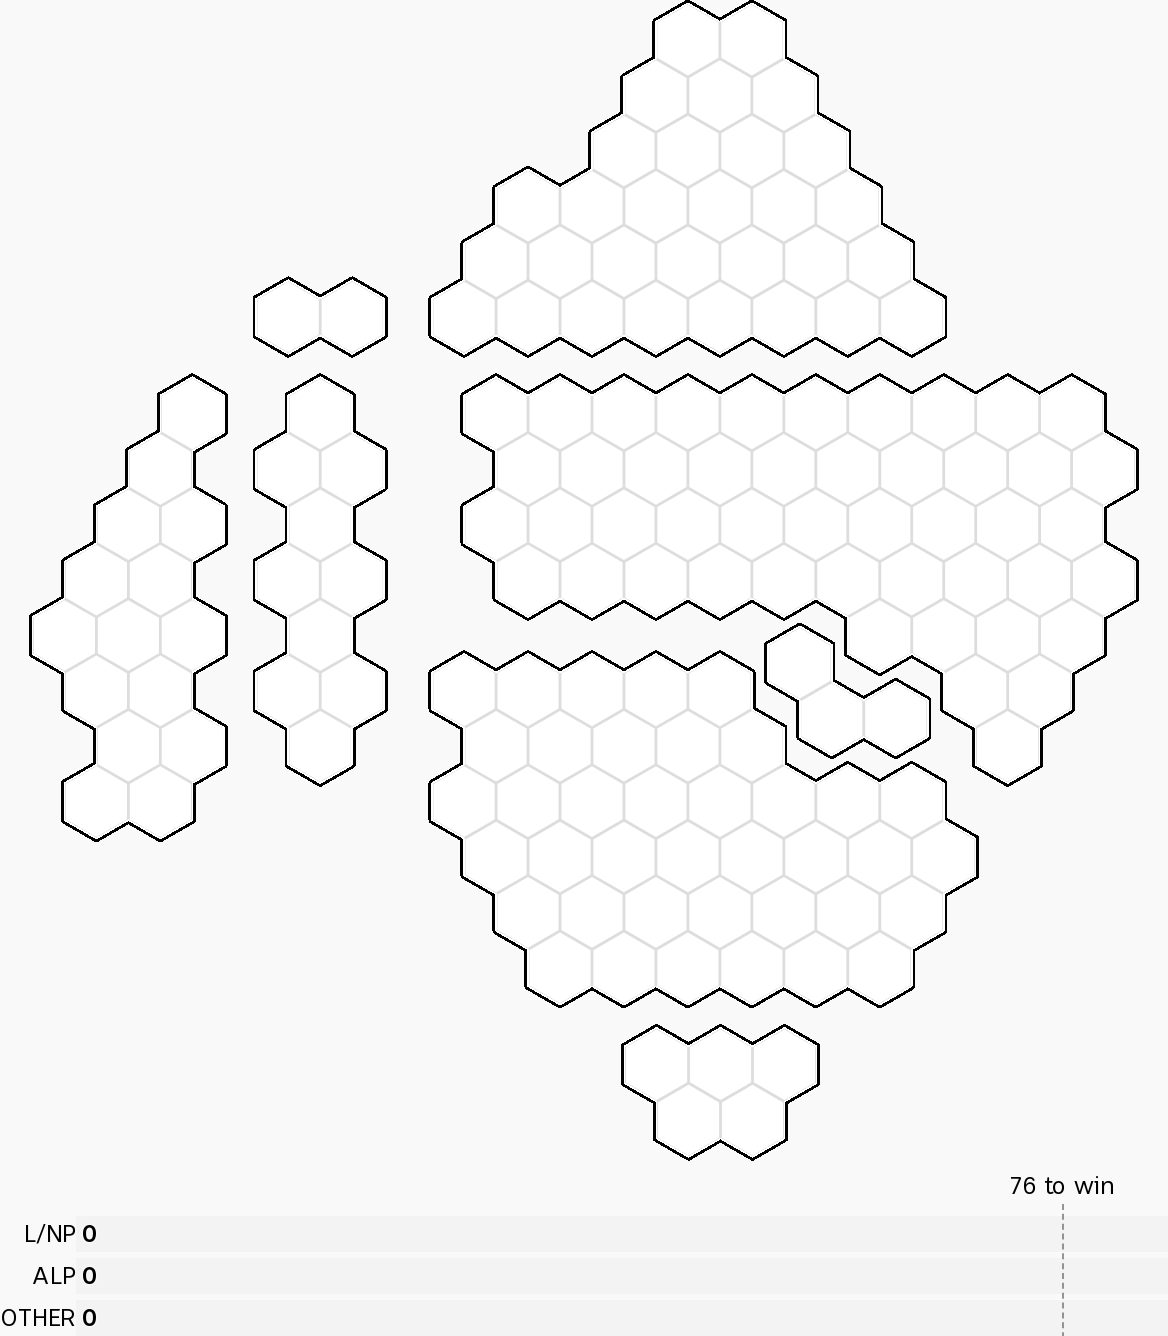 A white map of Australia with black outline, divided up into 151 hexagonal shapes.